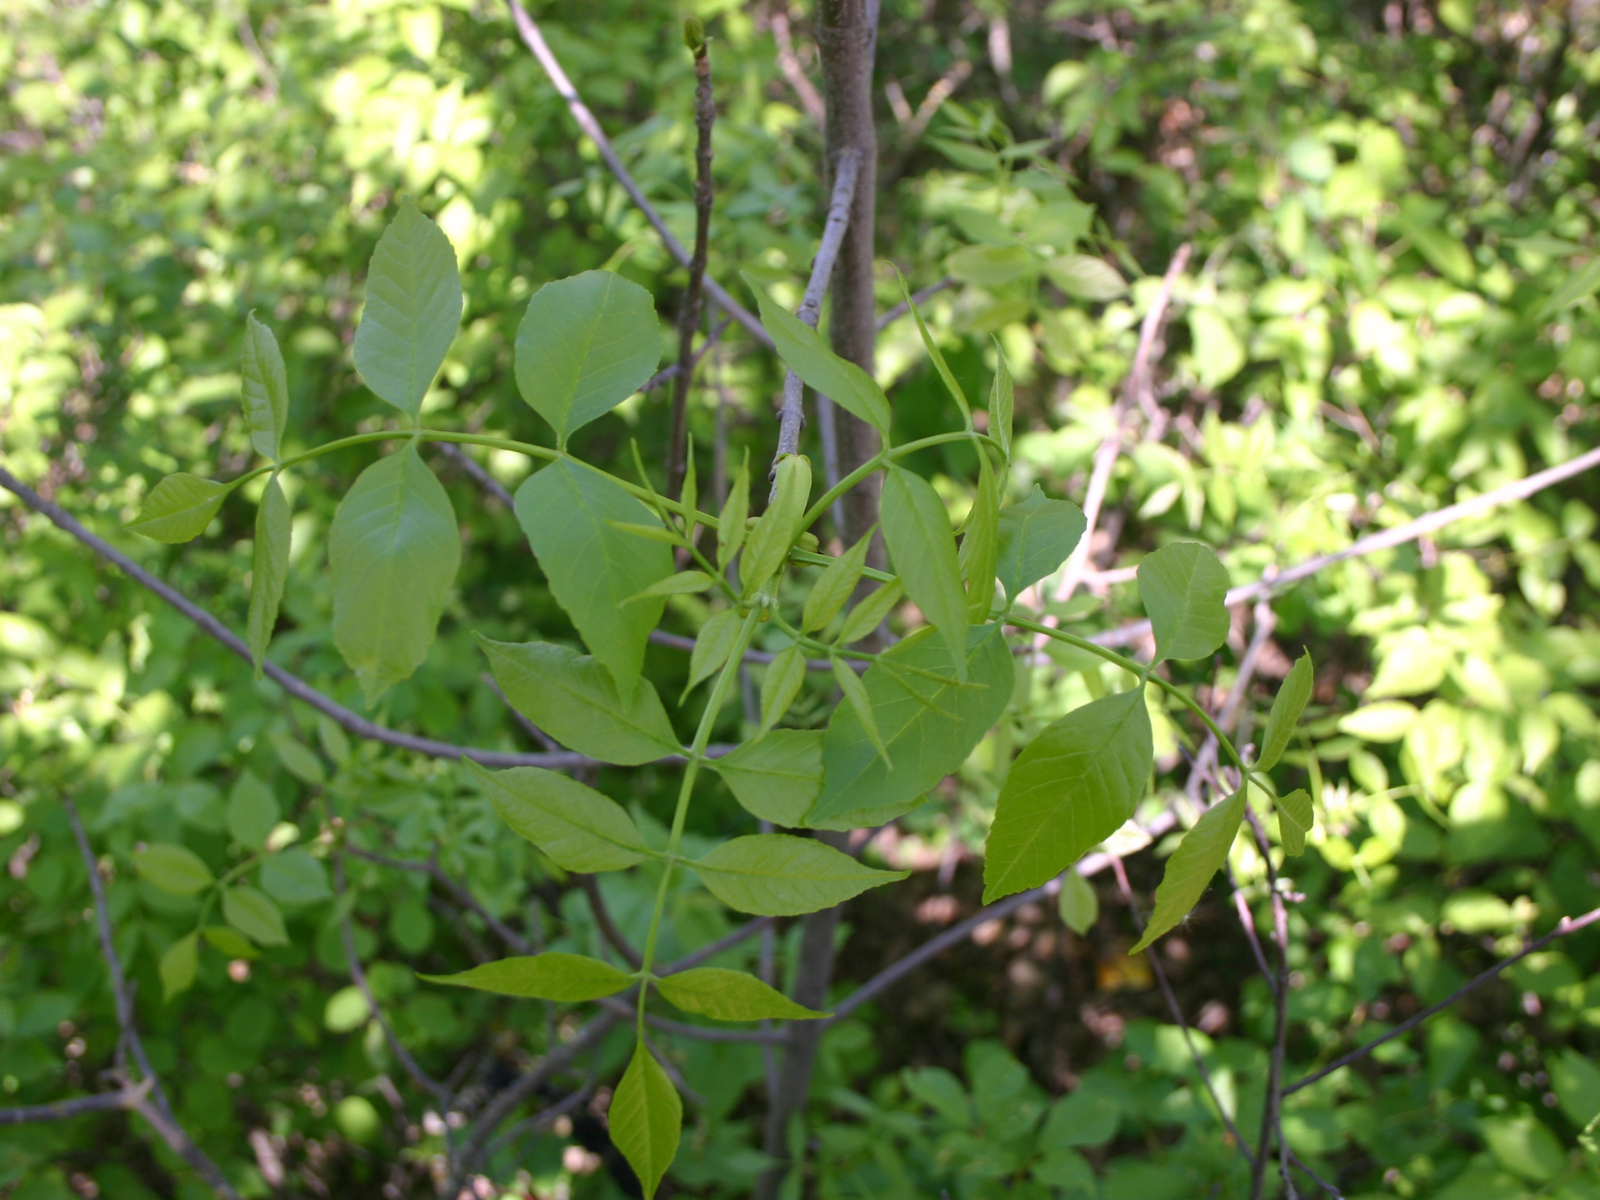 Close-up on a young, green branch with small green leaves.